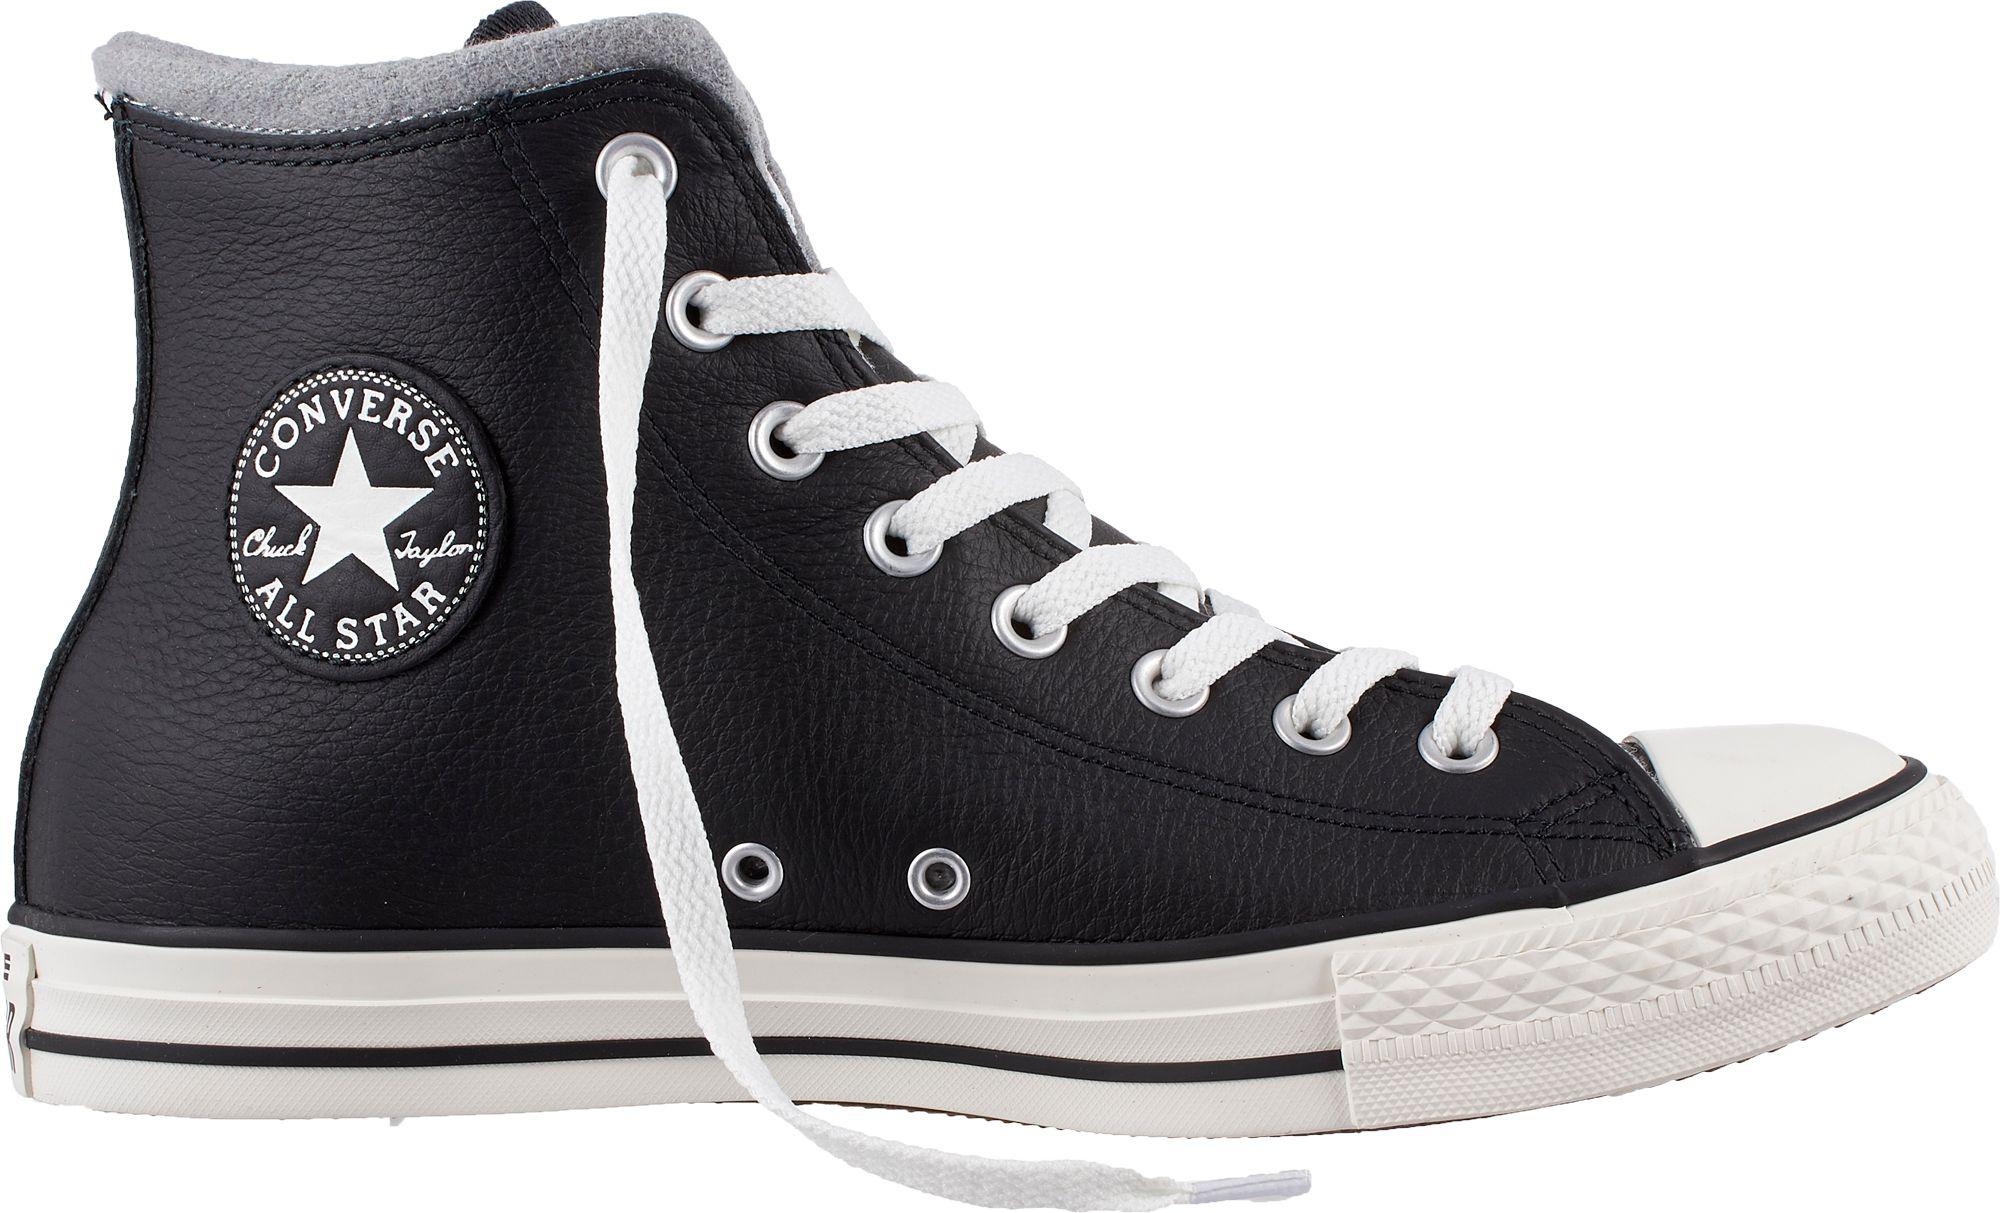 Converse Chuck Taylor All Star Leather Wool Hi-top Casual Shoes in Black/Wh...